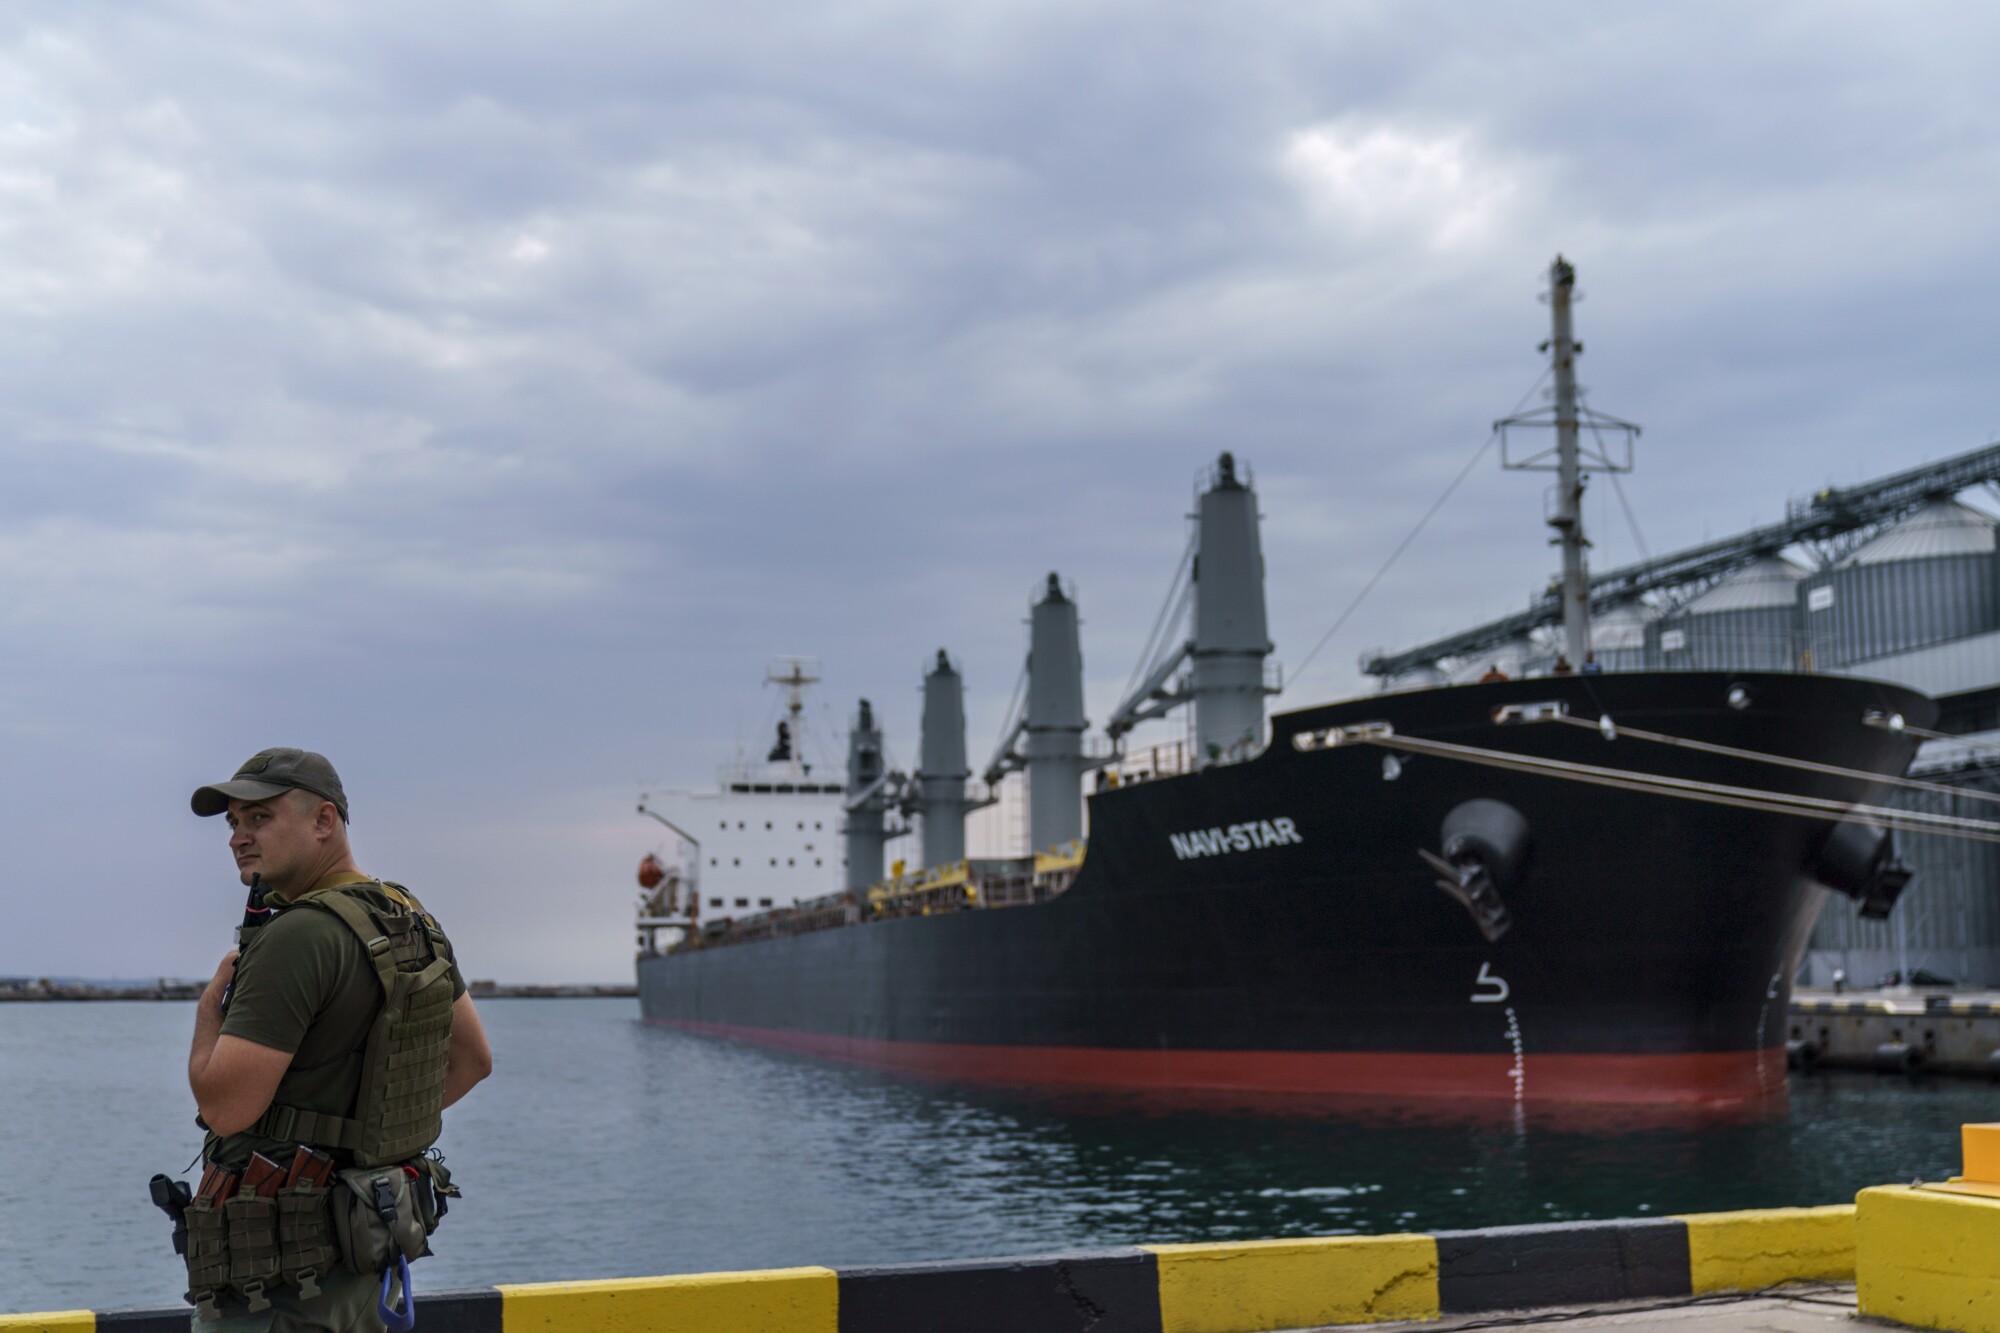 A security officer stands next to a ship in the port.